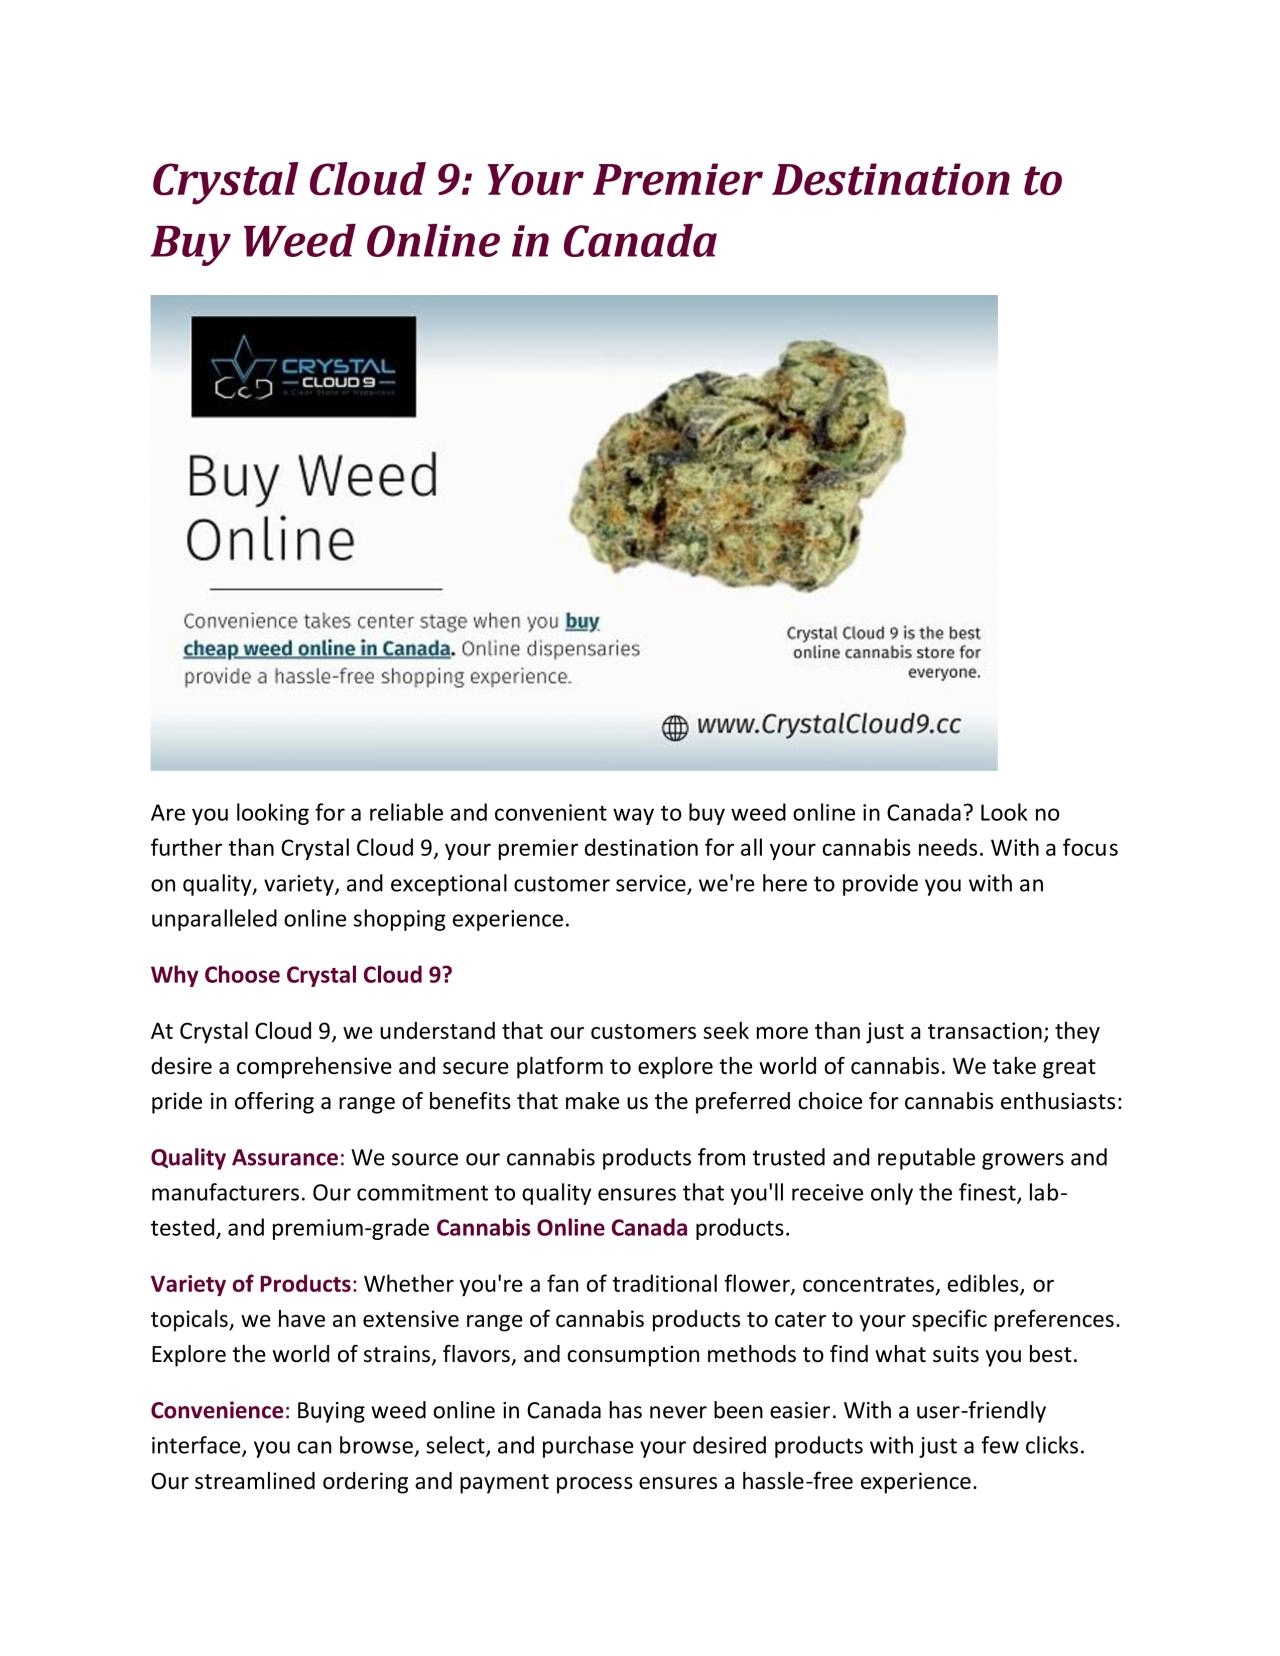 Crystal Cloud 9: Your Premier Destination to Buy Weed Online in Canada